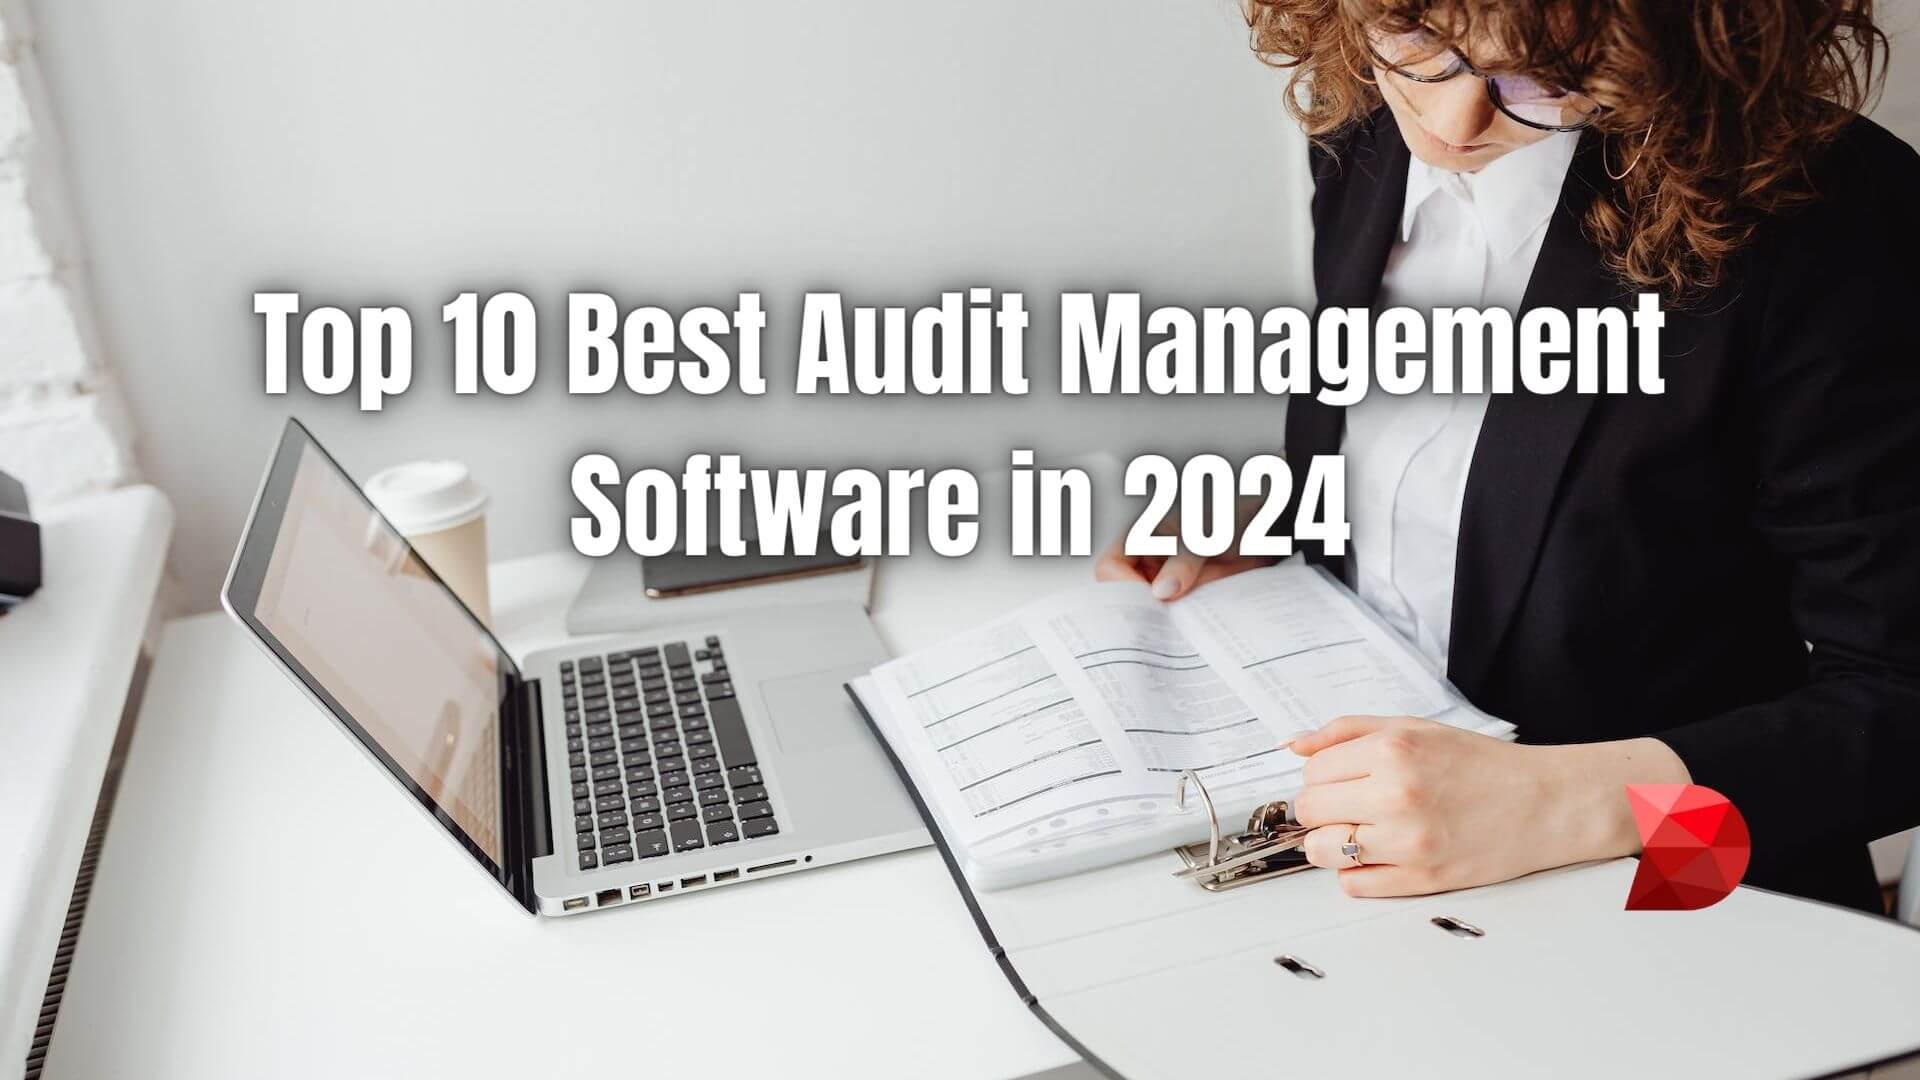 This article features ten of the best audit management software solutions available in 2024. Read here to learn more.